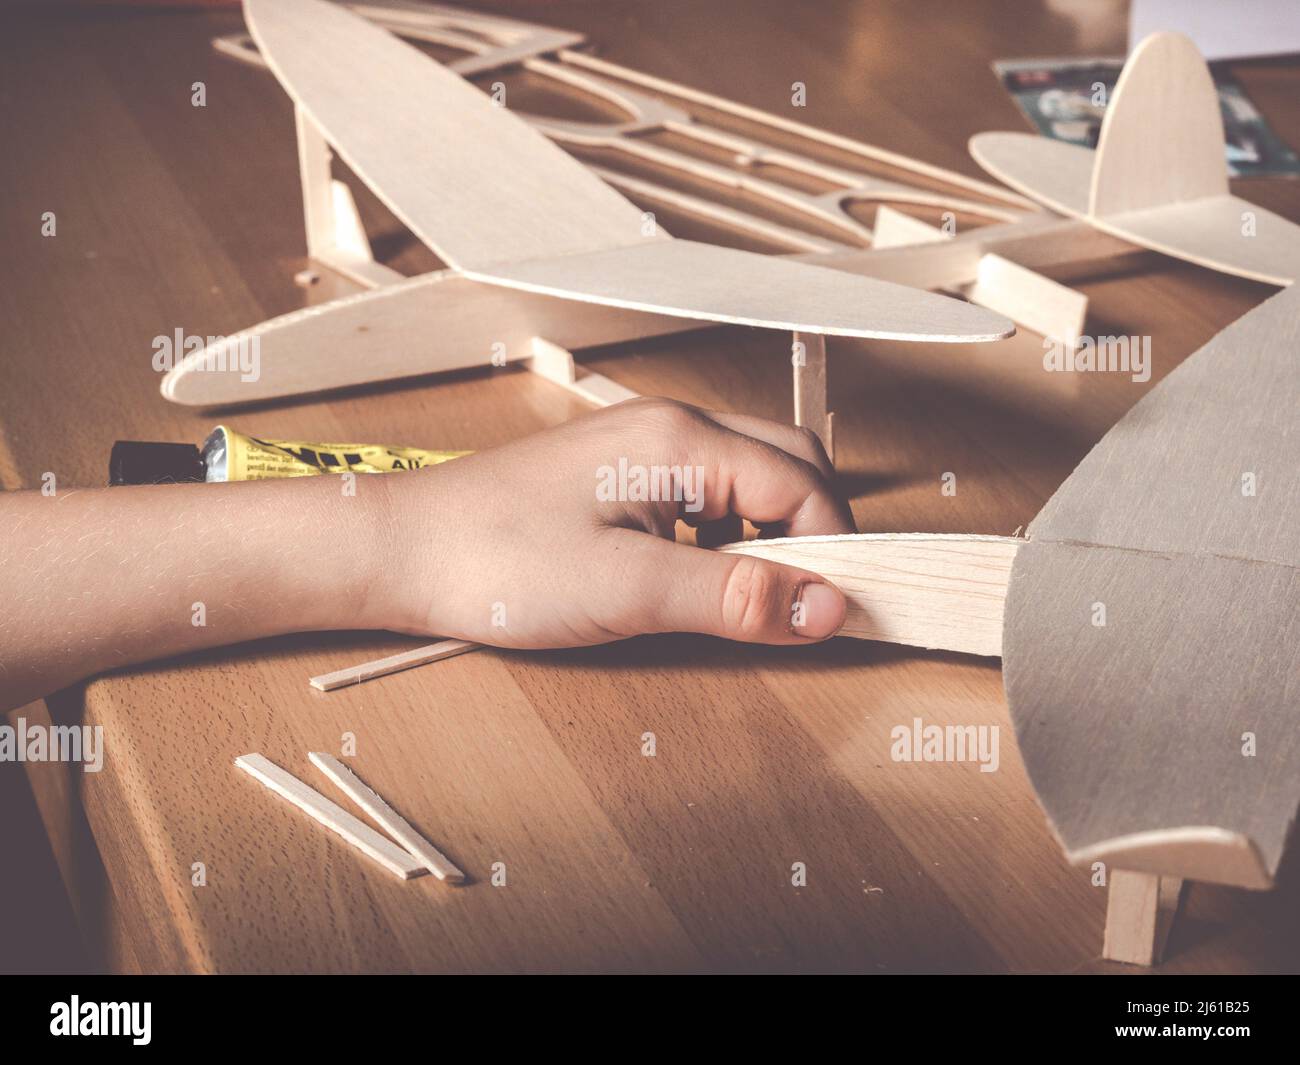 image shows a balsa wood aircraft model and kids hand holding a second wooden flight model Stock Photo